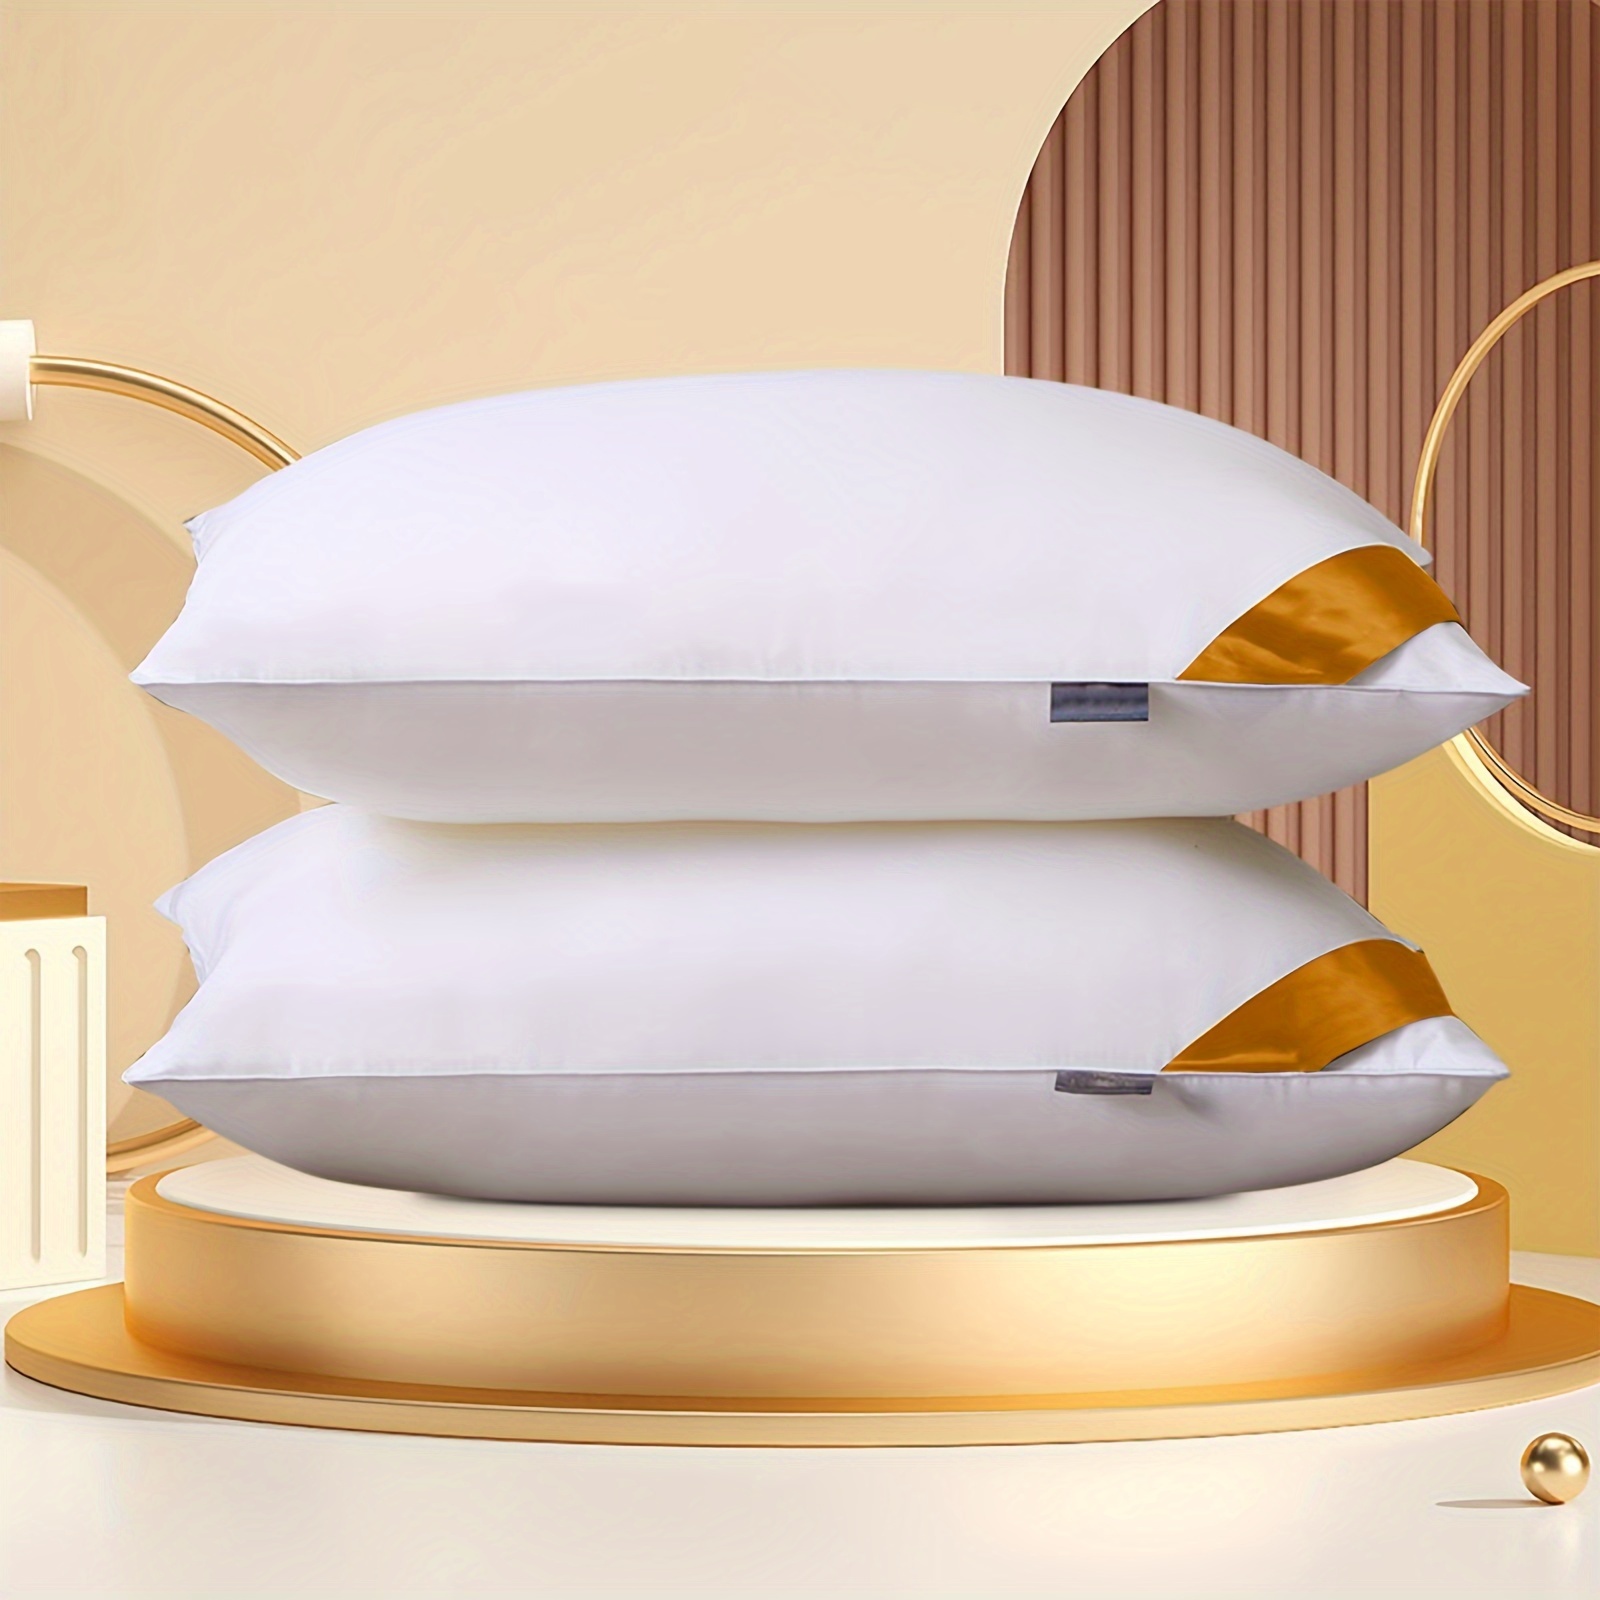 

2 Pc Feather Velvet Hotel-grade Pillow Core Soft And Supportive Down Bed Pillow Suitable For Back Side And Stomach Sleepers Made Of Skin-friendly Cotton Fabric